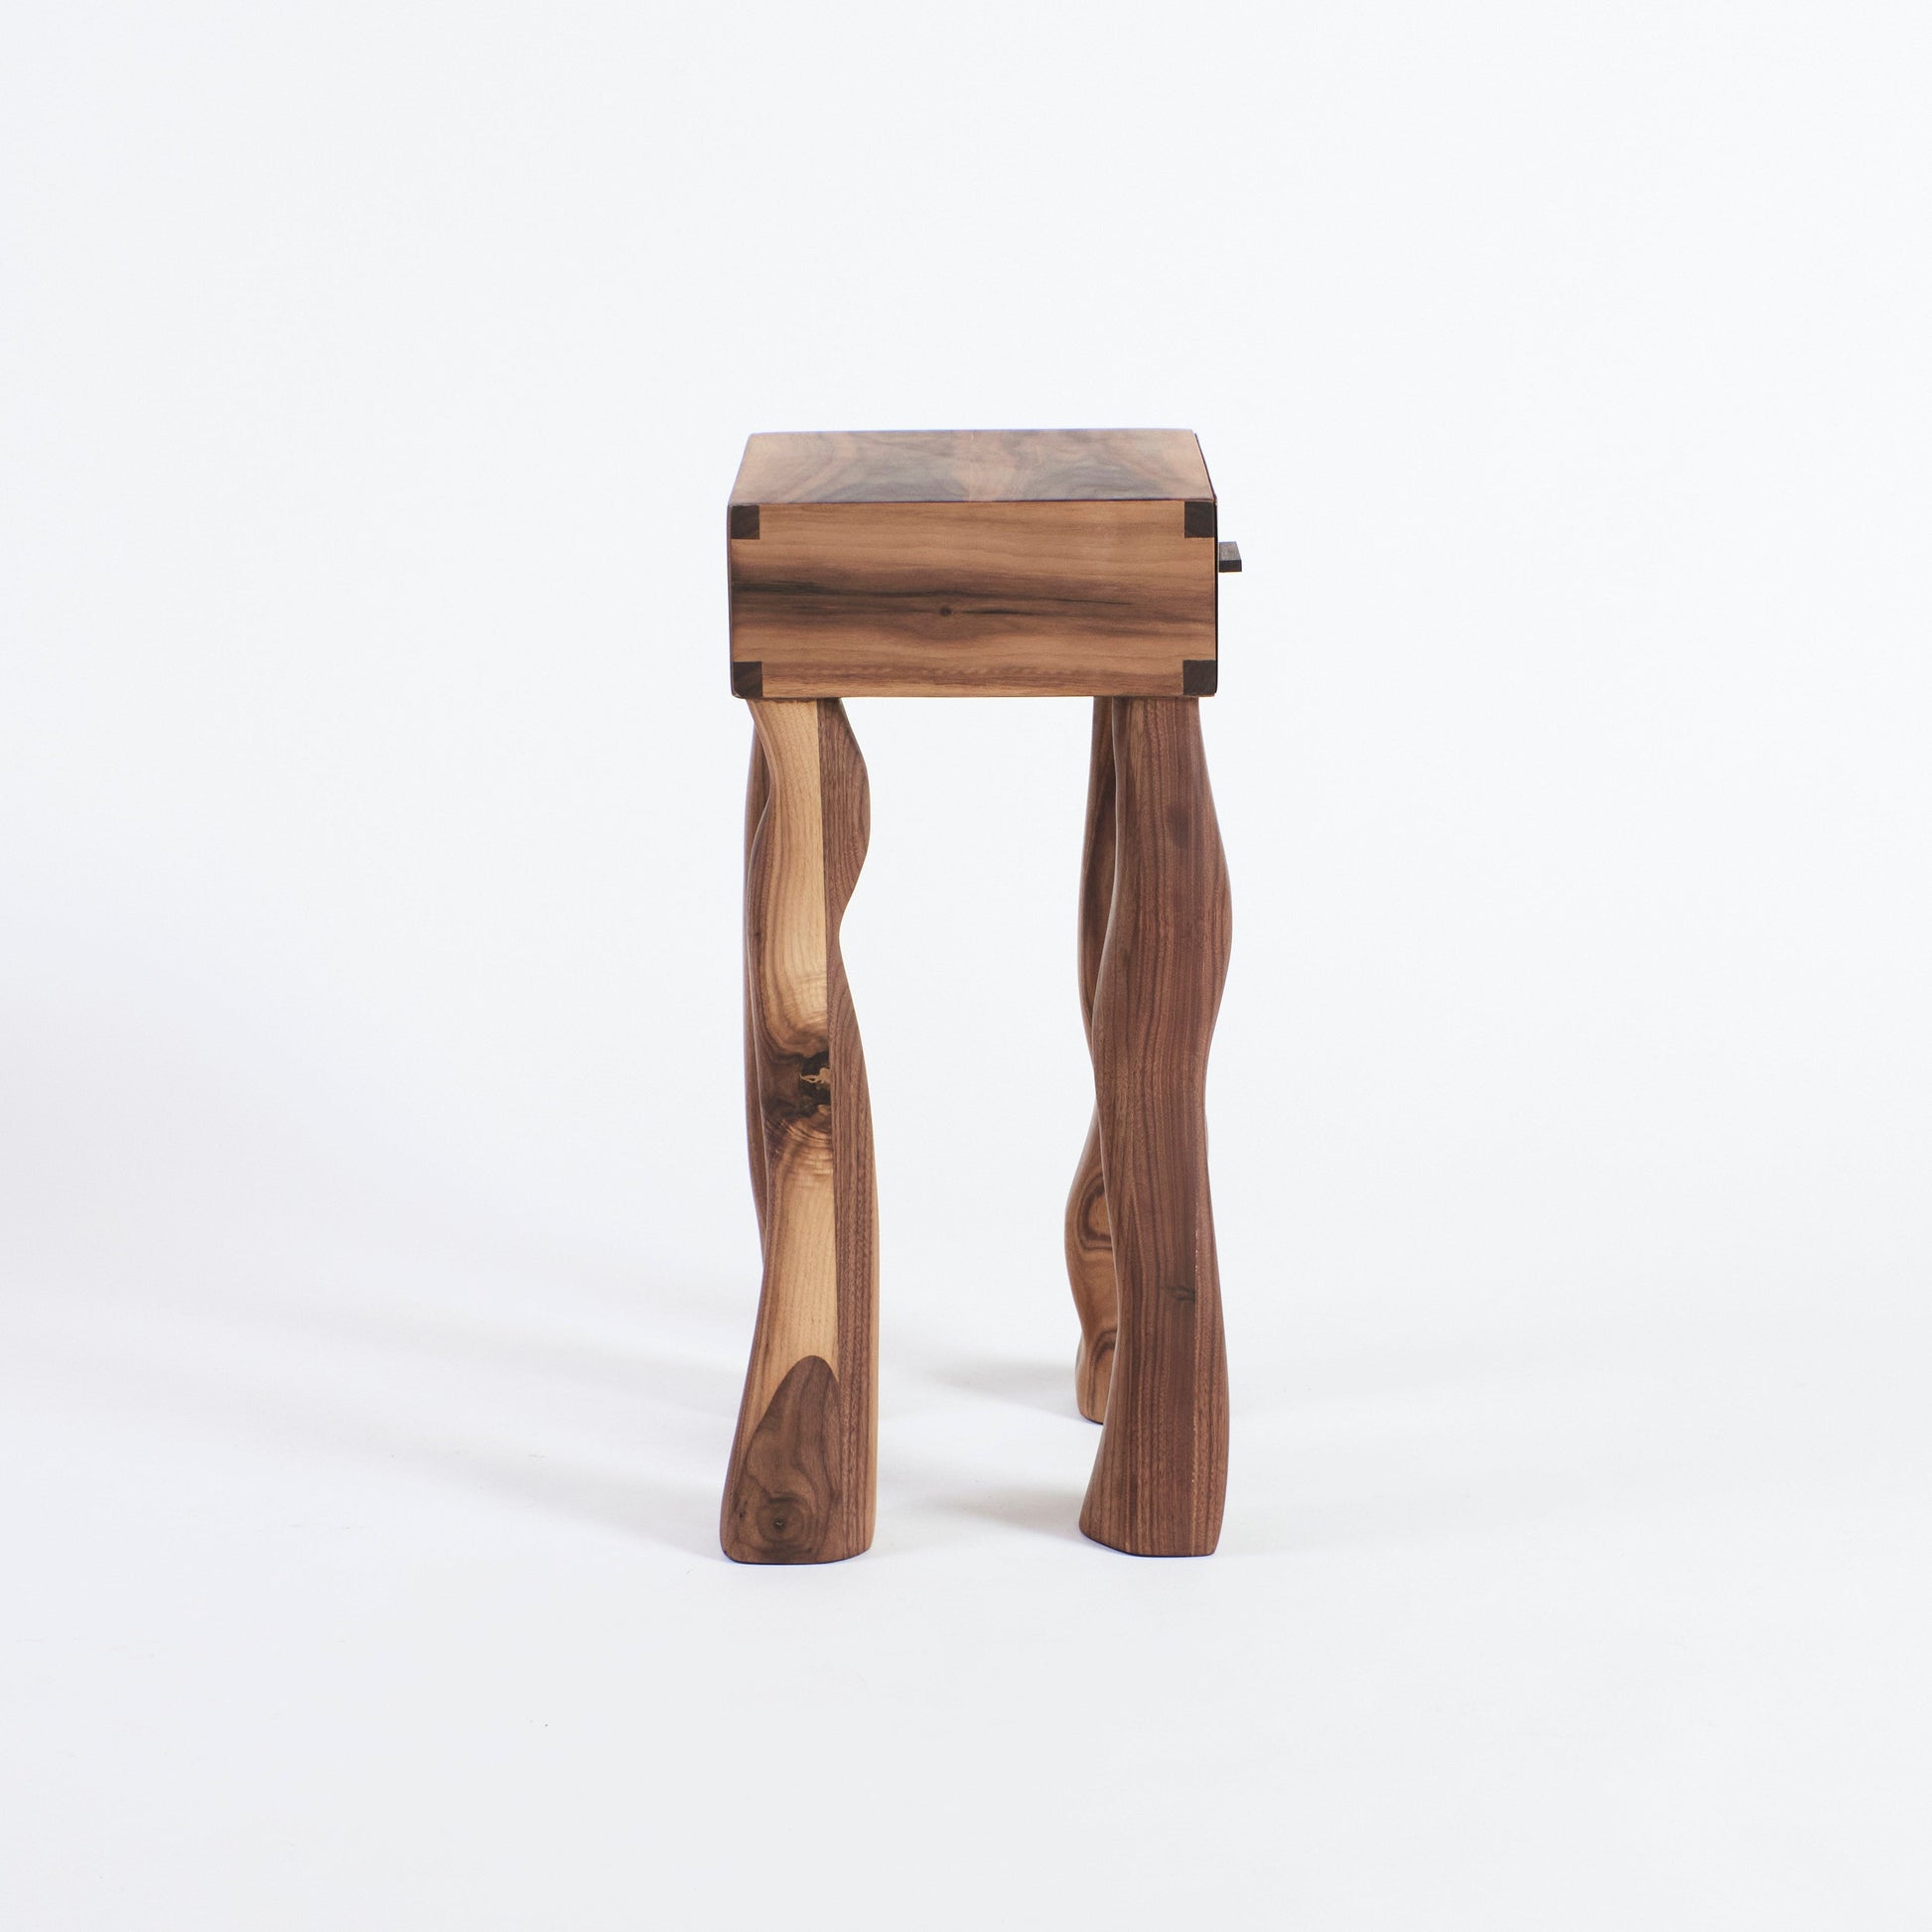 Side Table in Walnut - No Foot End Tables